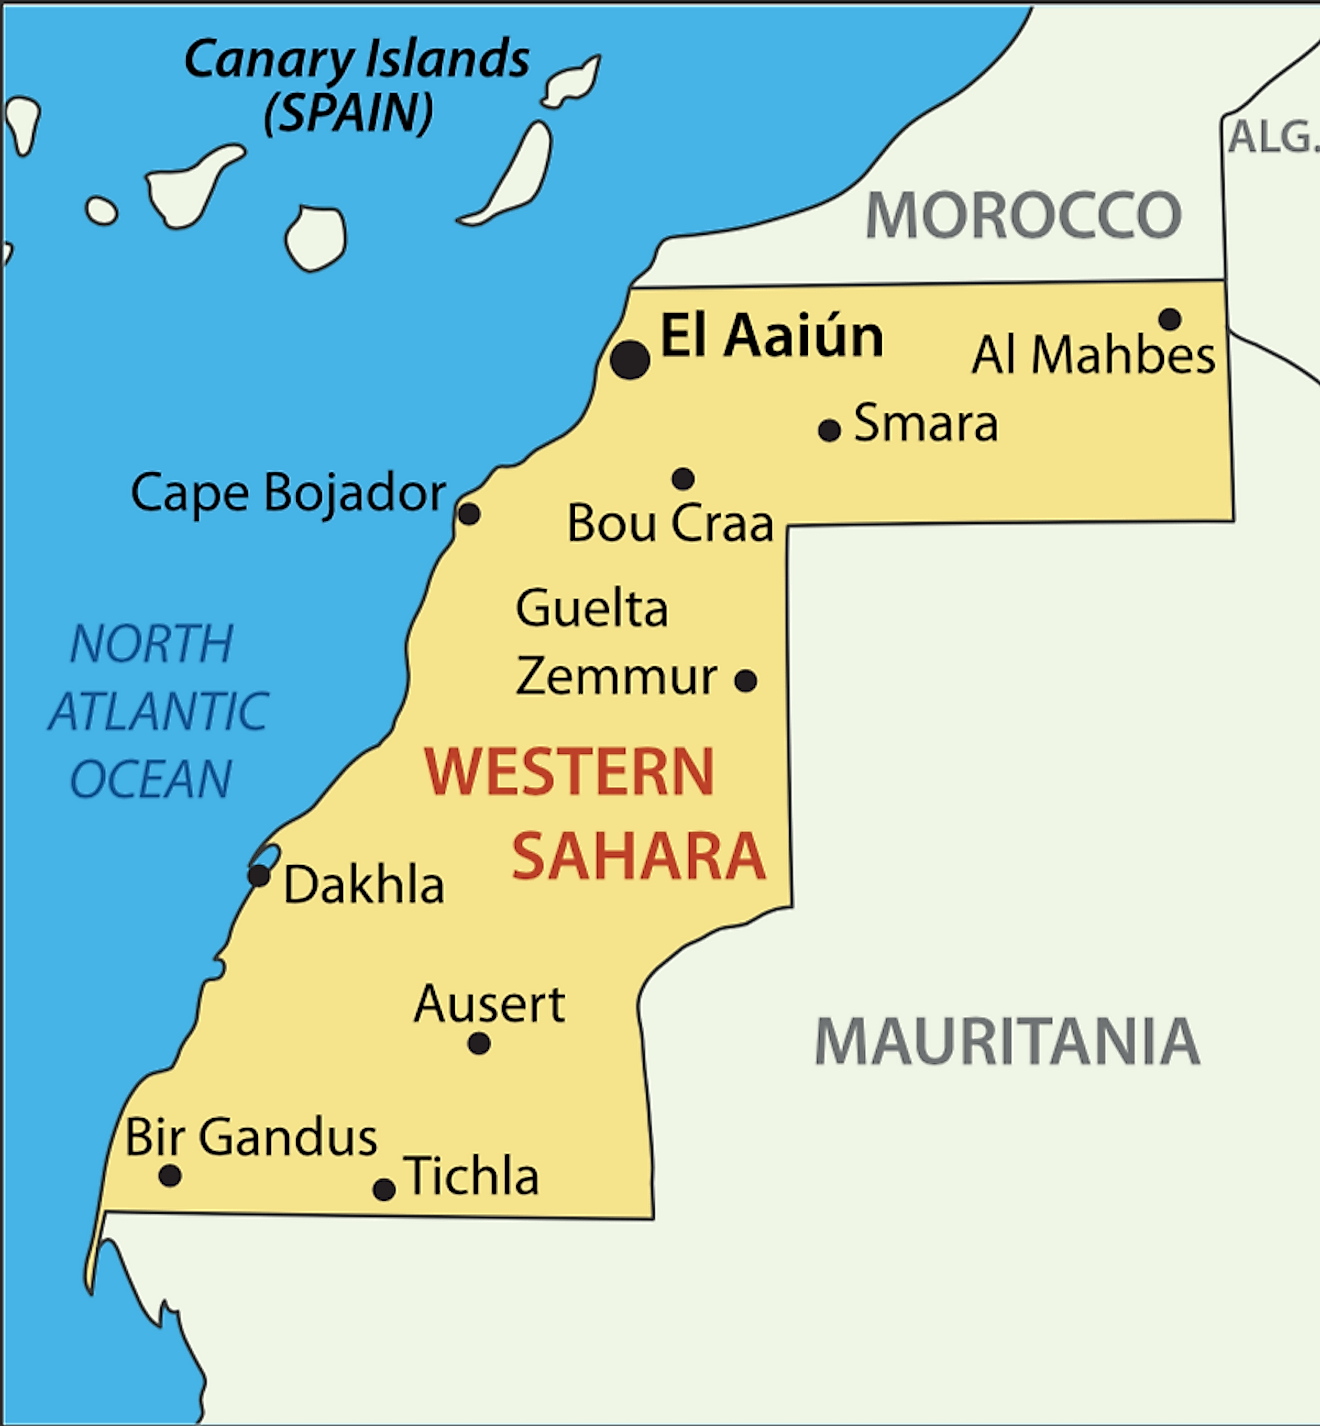 Political Map of Western Sahara showing major cities including the largest city of Laayoune or El Aaiún. It is a disputed territory with no official administrative divisions of its own.